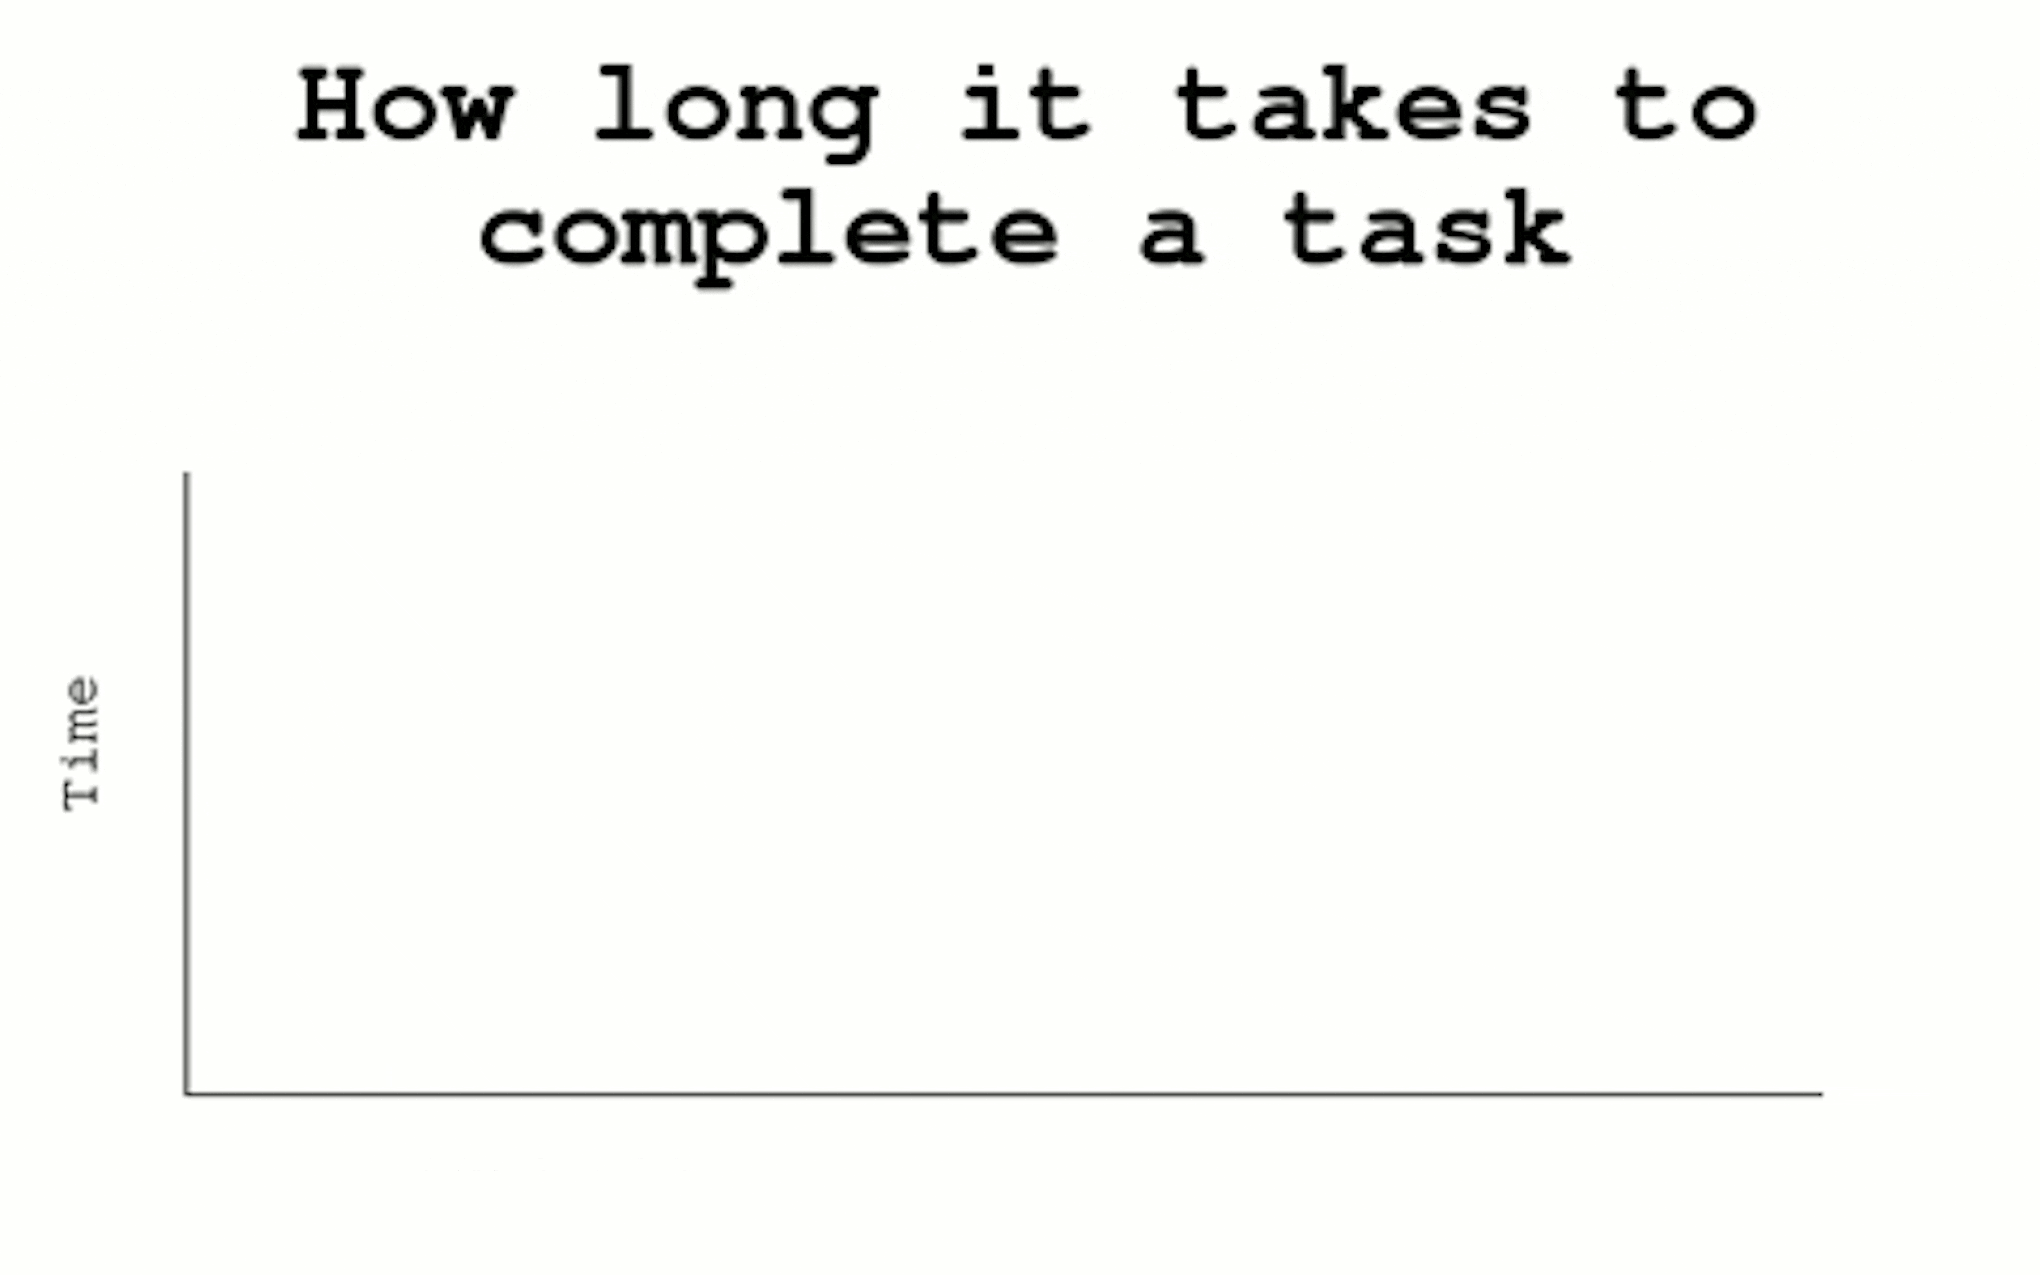 How Long It Takes to Complete a Task.